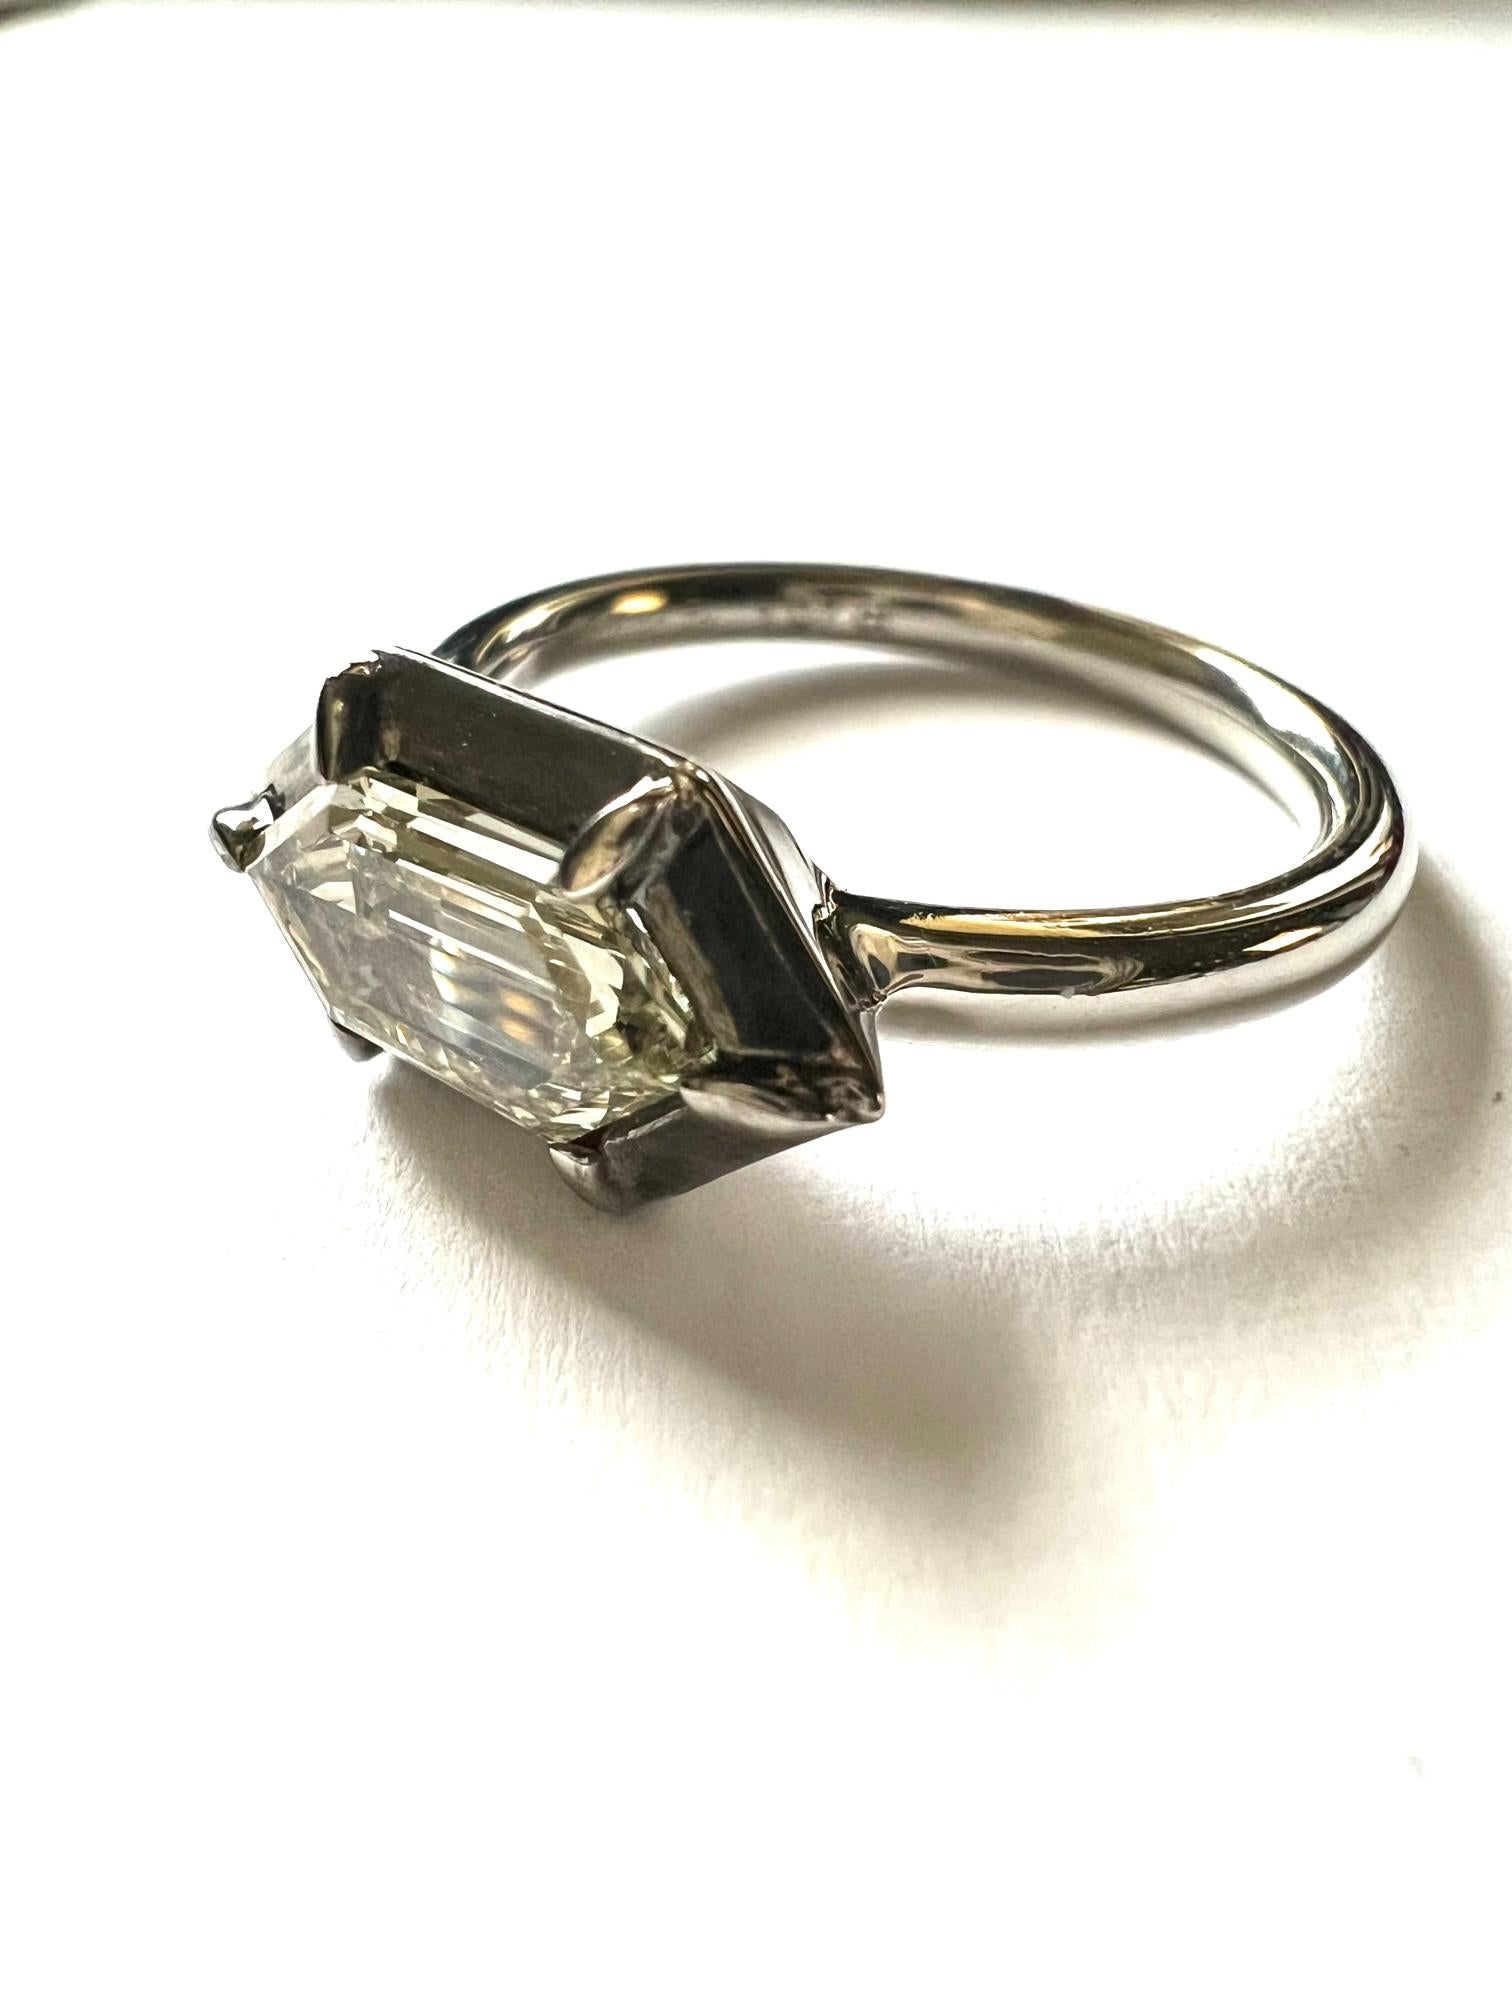 Ring in 950/Platinum (7 gram), set with with 1x Diamond (L/VS2, hexaconal, step cut, 1,07ct) with the blackened bezel top.

This modern gem has a very sleek, elegant silhouette with full facets and excellent brilliance. GIA Certified.

Ringsize is